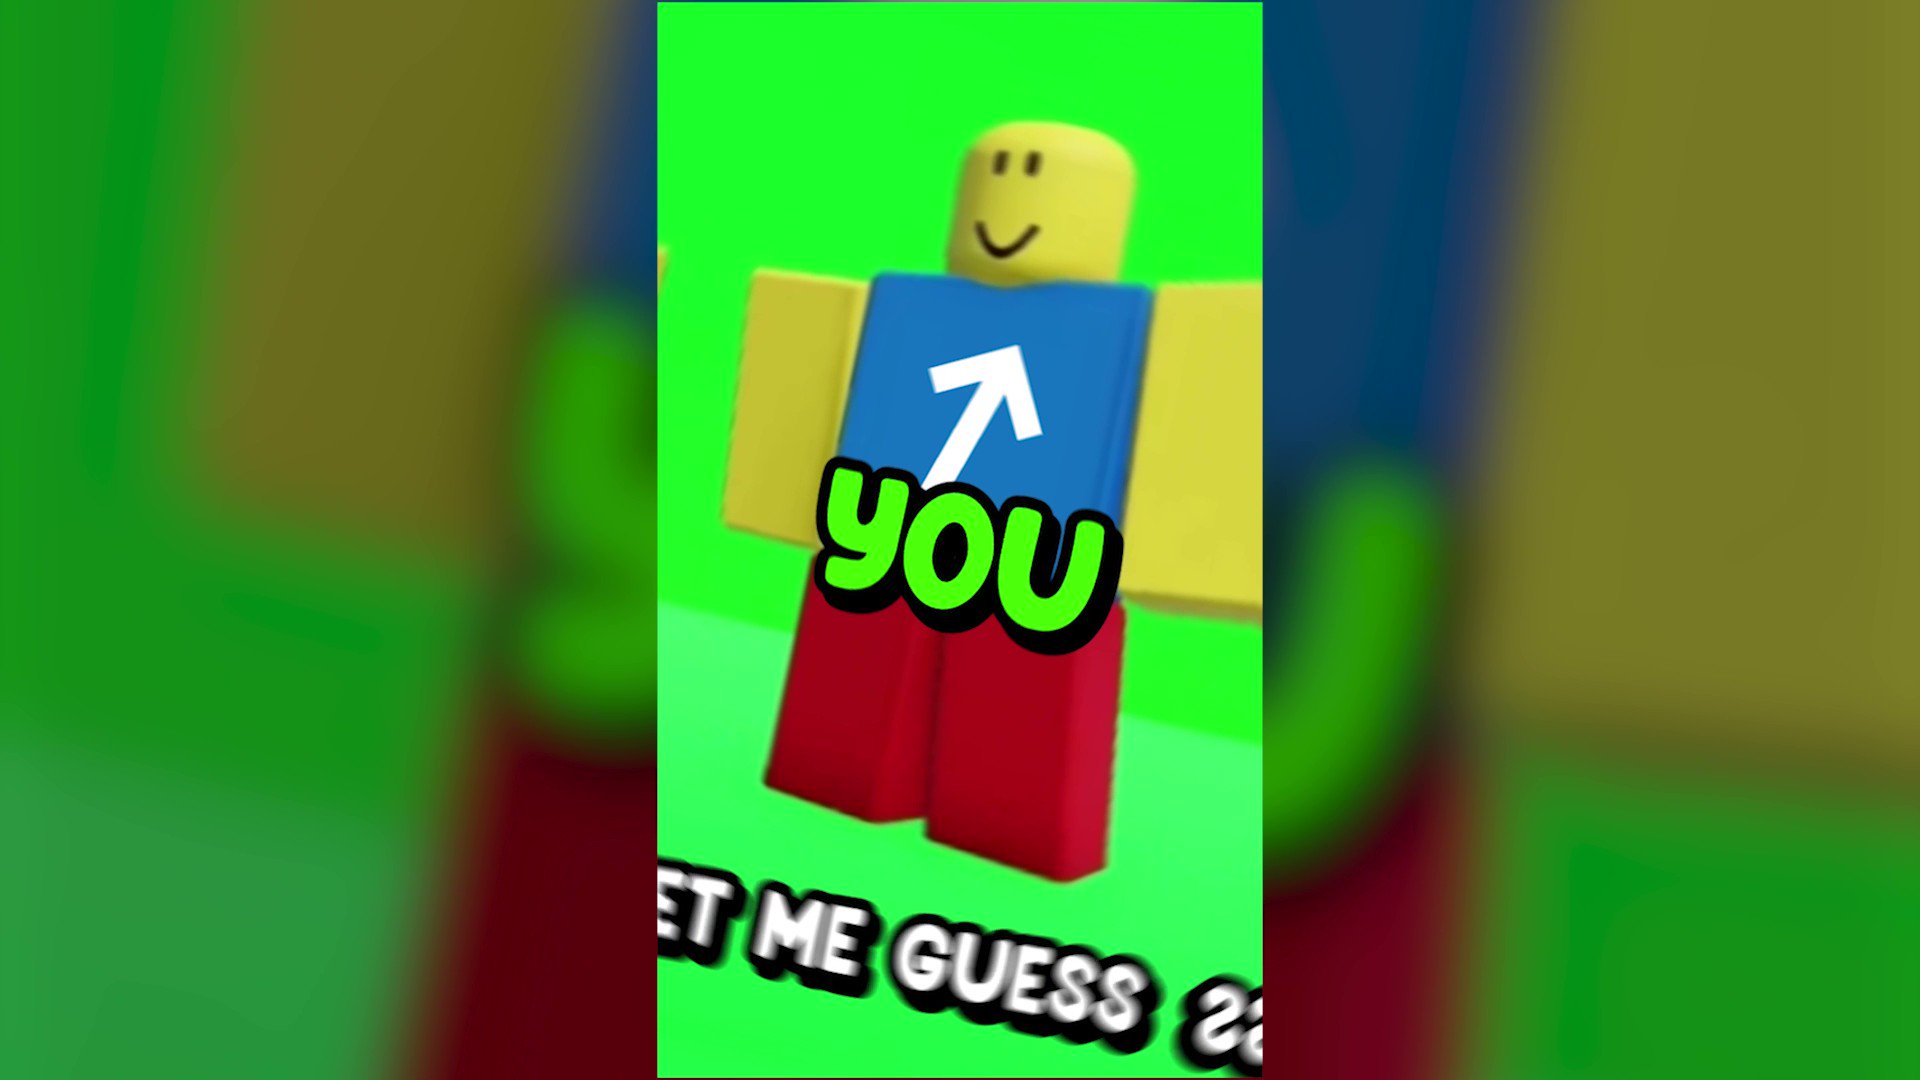 WATCH THIS VIDEO IN 2023 (FREE ROBUX) 🤑 